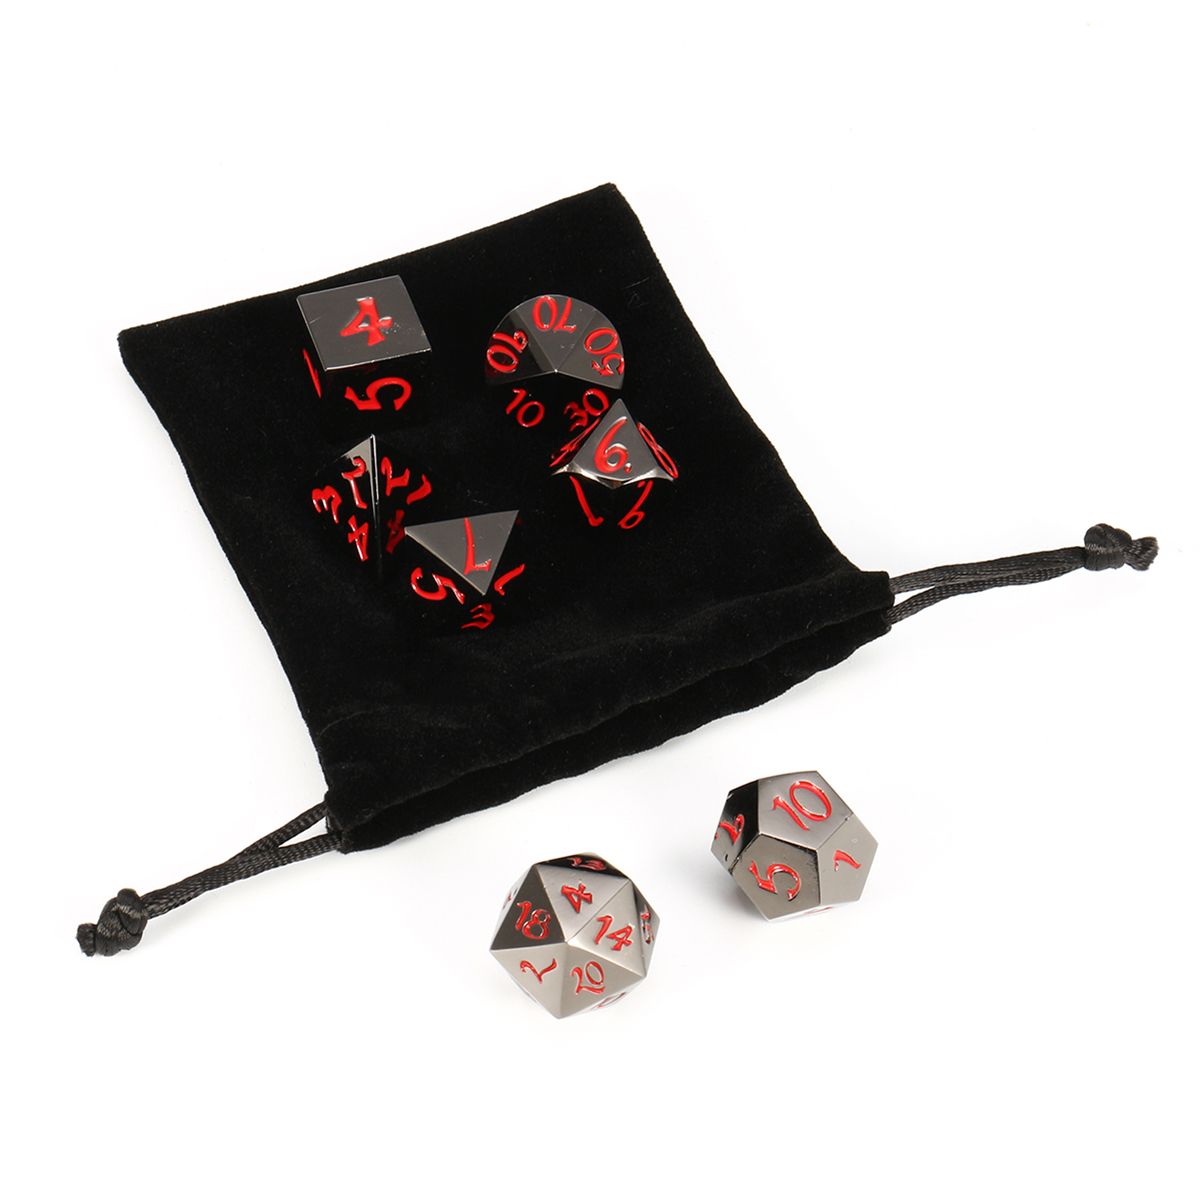 7Pcs-Antique-Metal-Polyhedral-Dices-Multisided-Dices-Set-Role-Playing-Game-Dice-With-Bag-1287356